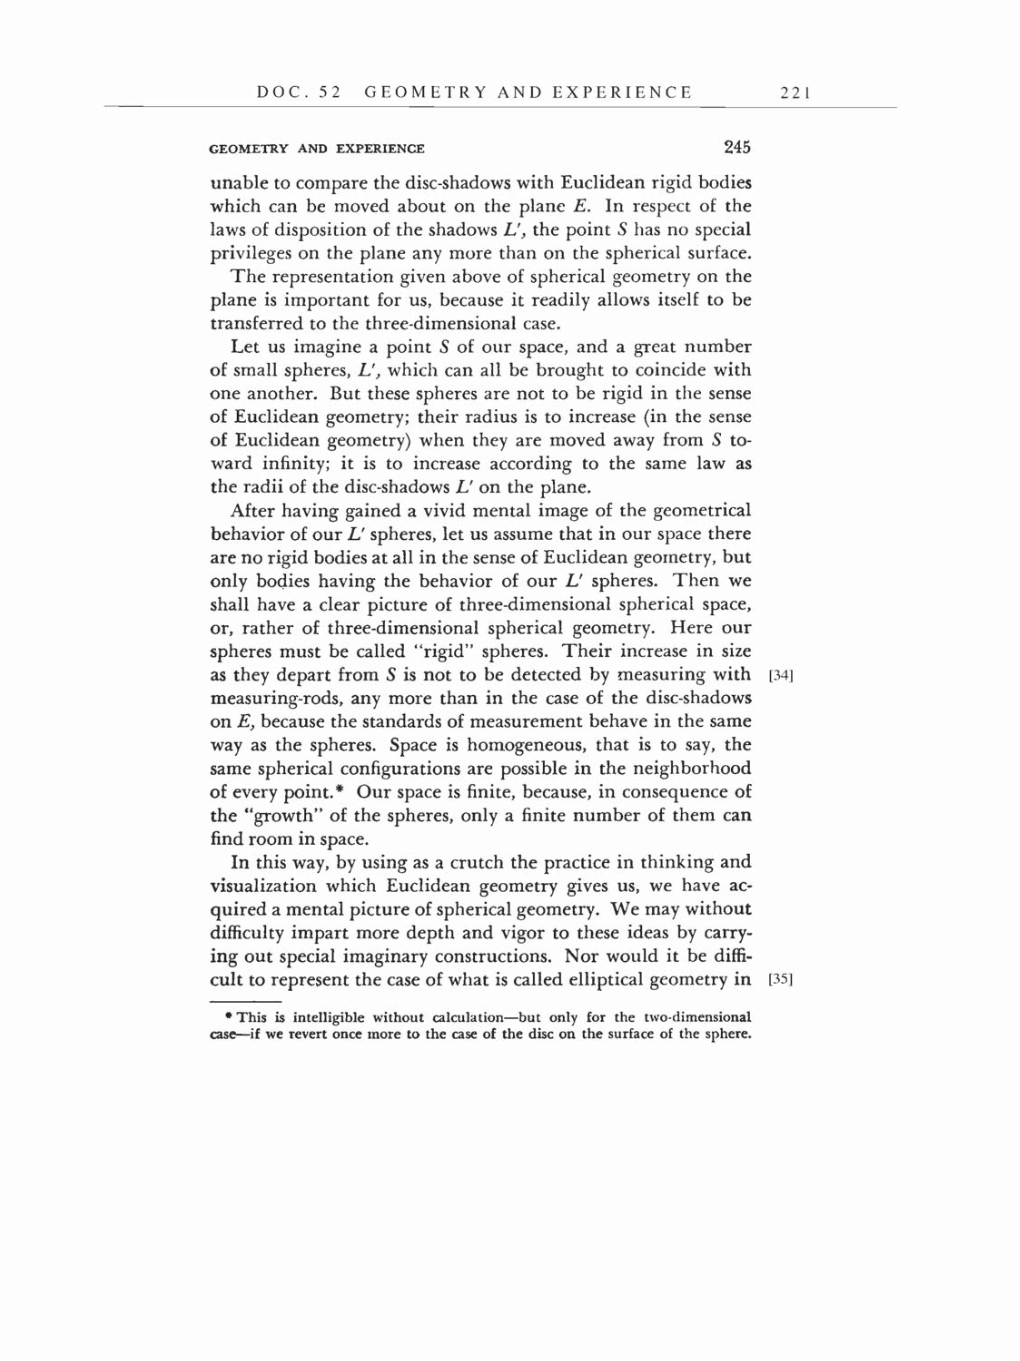 Volume 7: The Berlin Years: Writings, 1918-1921 (English translation supplement) page 221